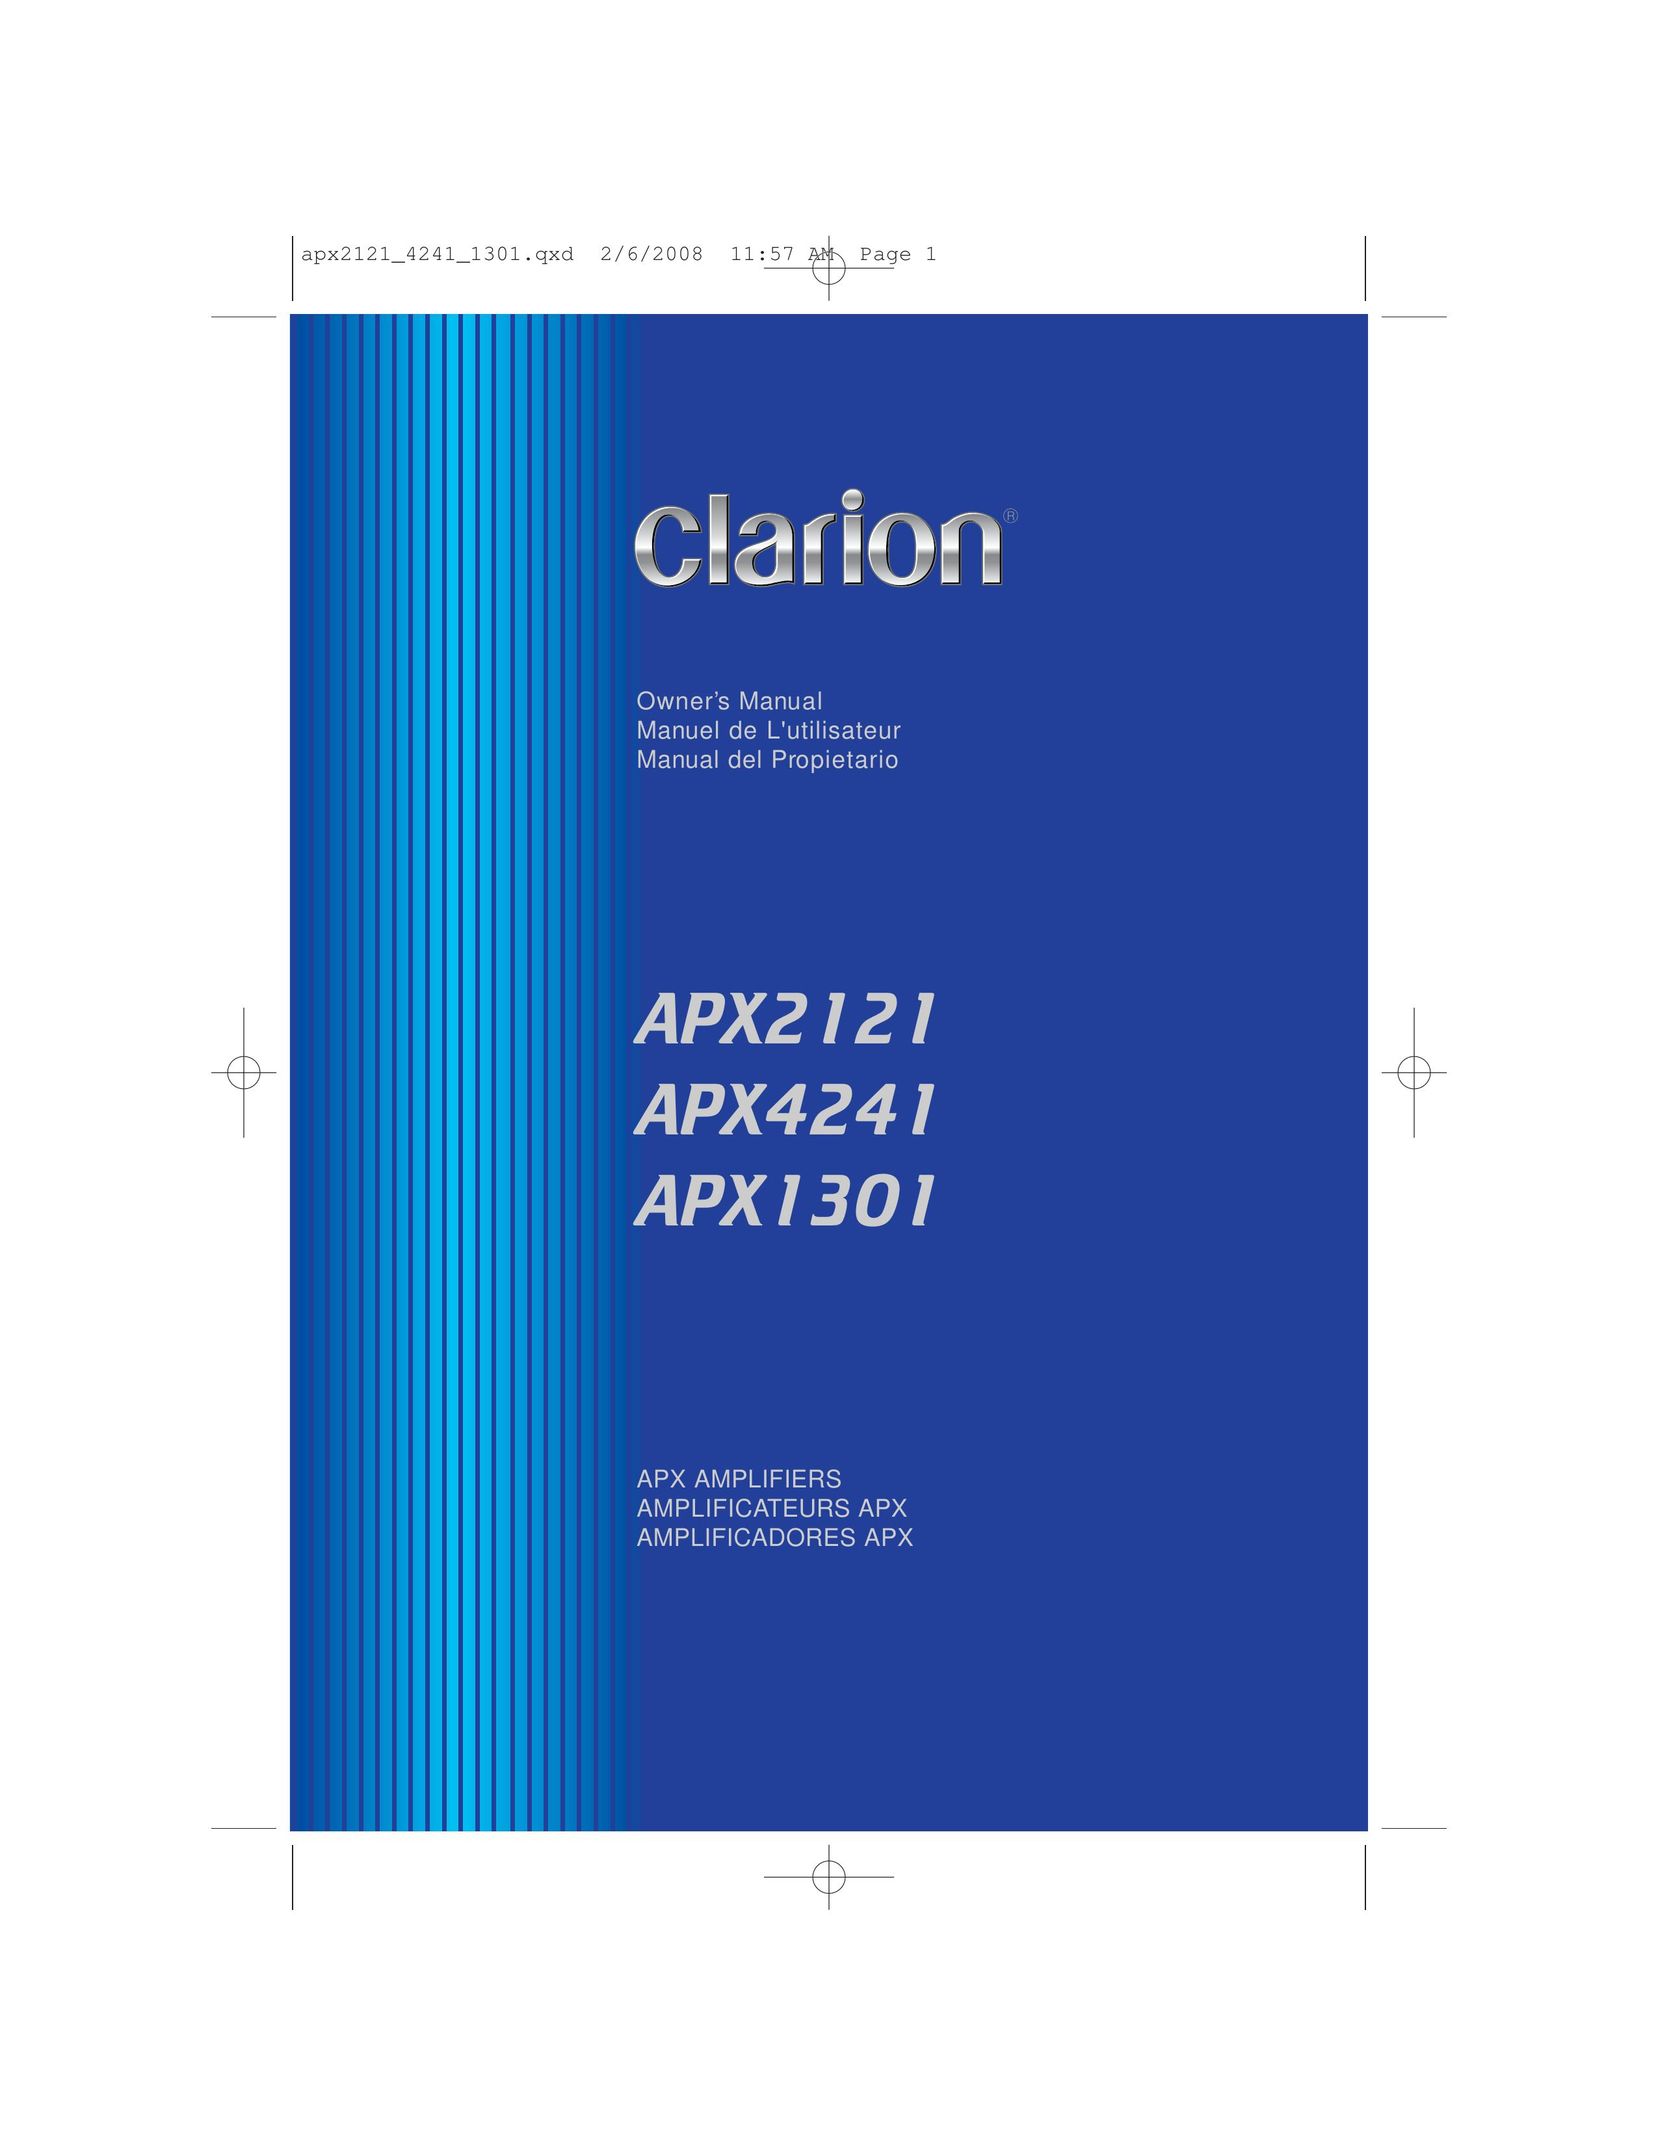 Clarion APX4241 Car Amplifier User Manual